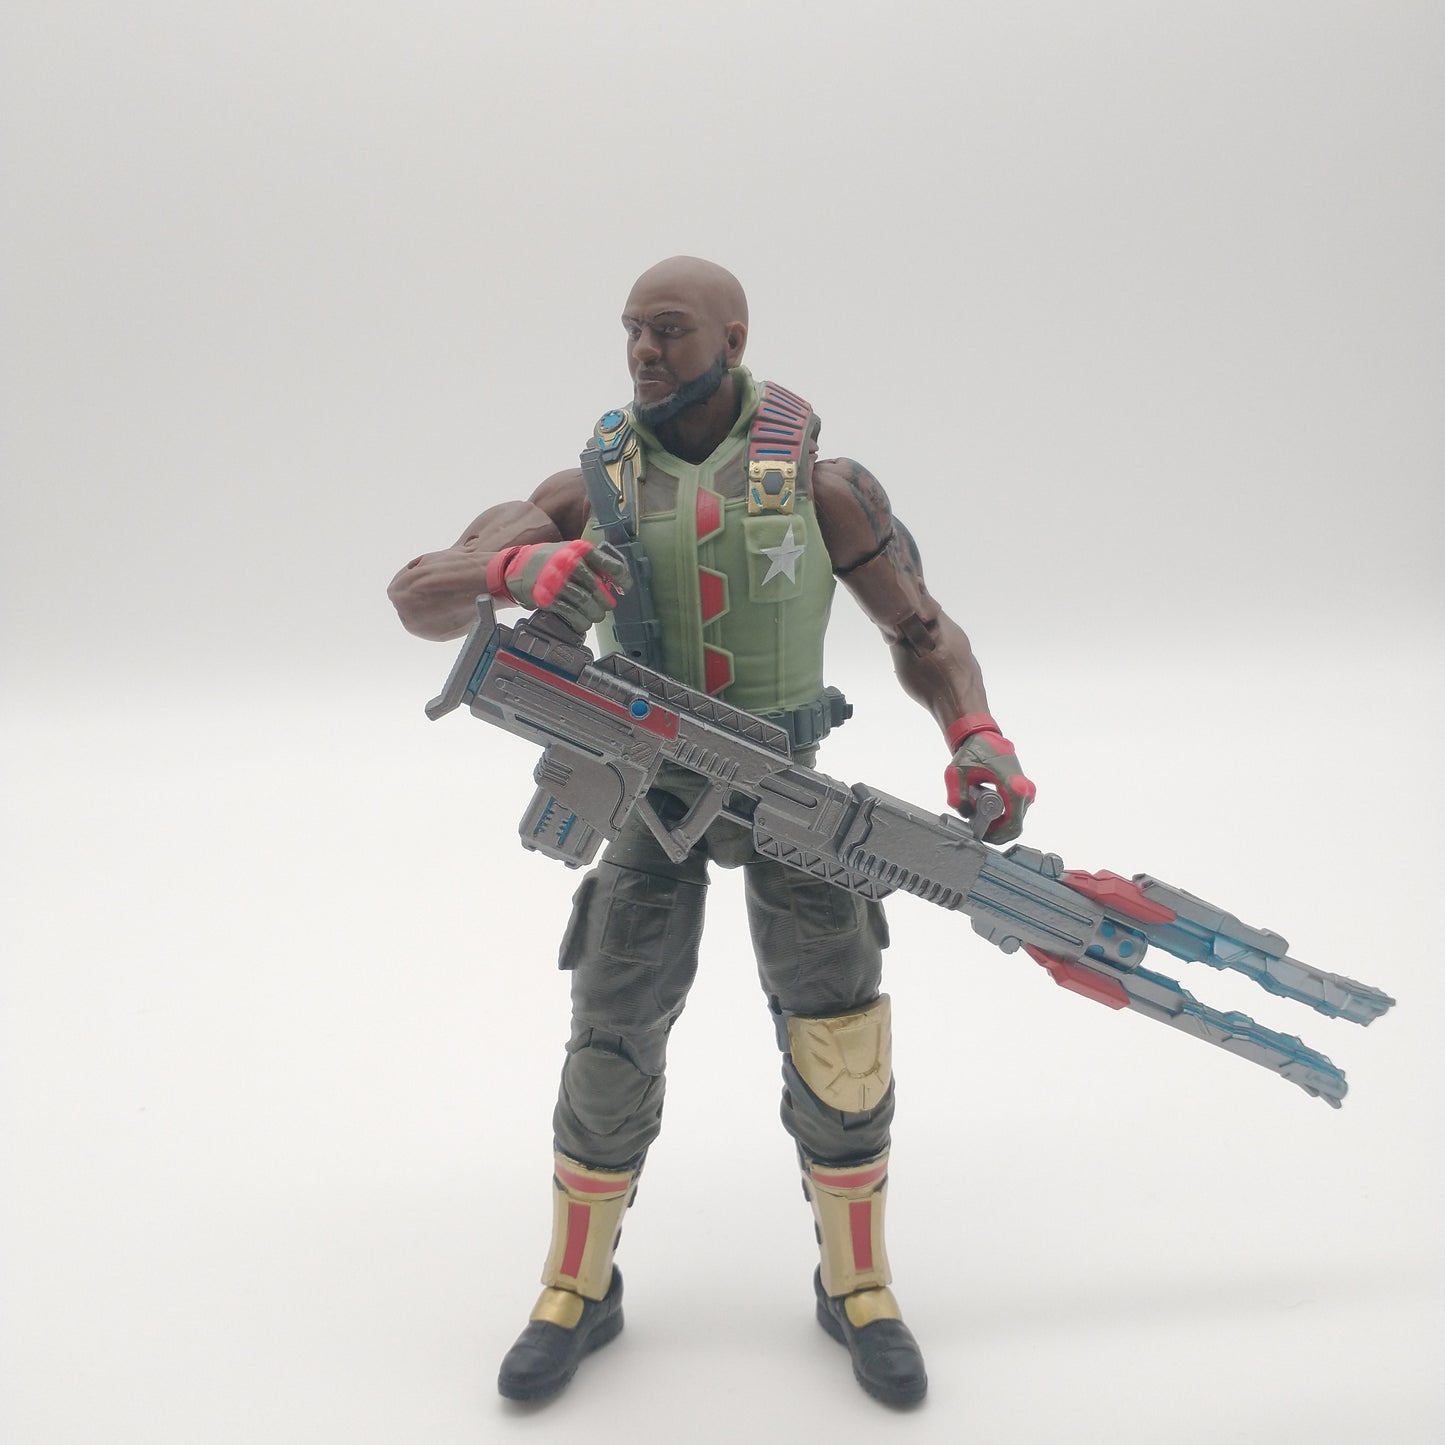 The action figure from the front